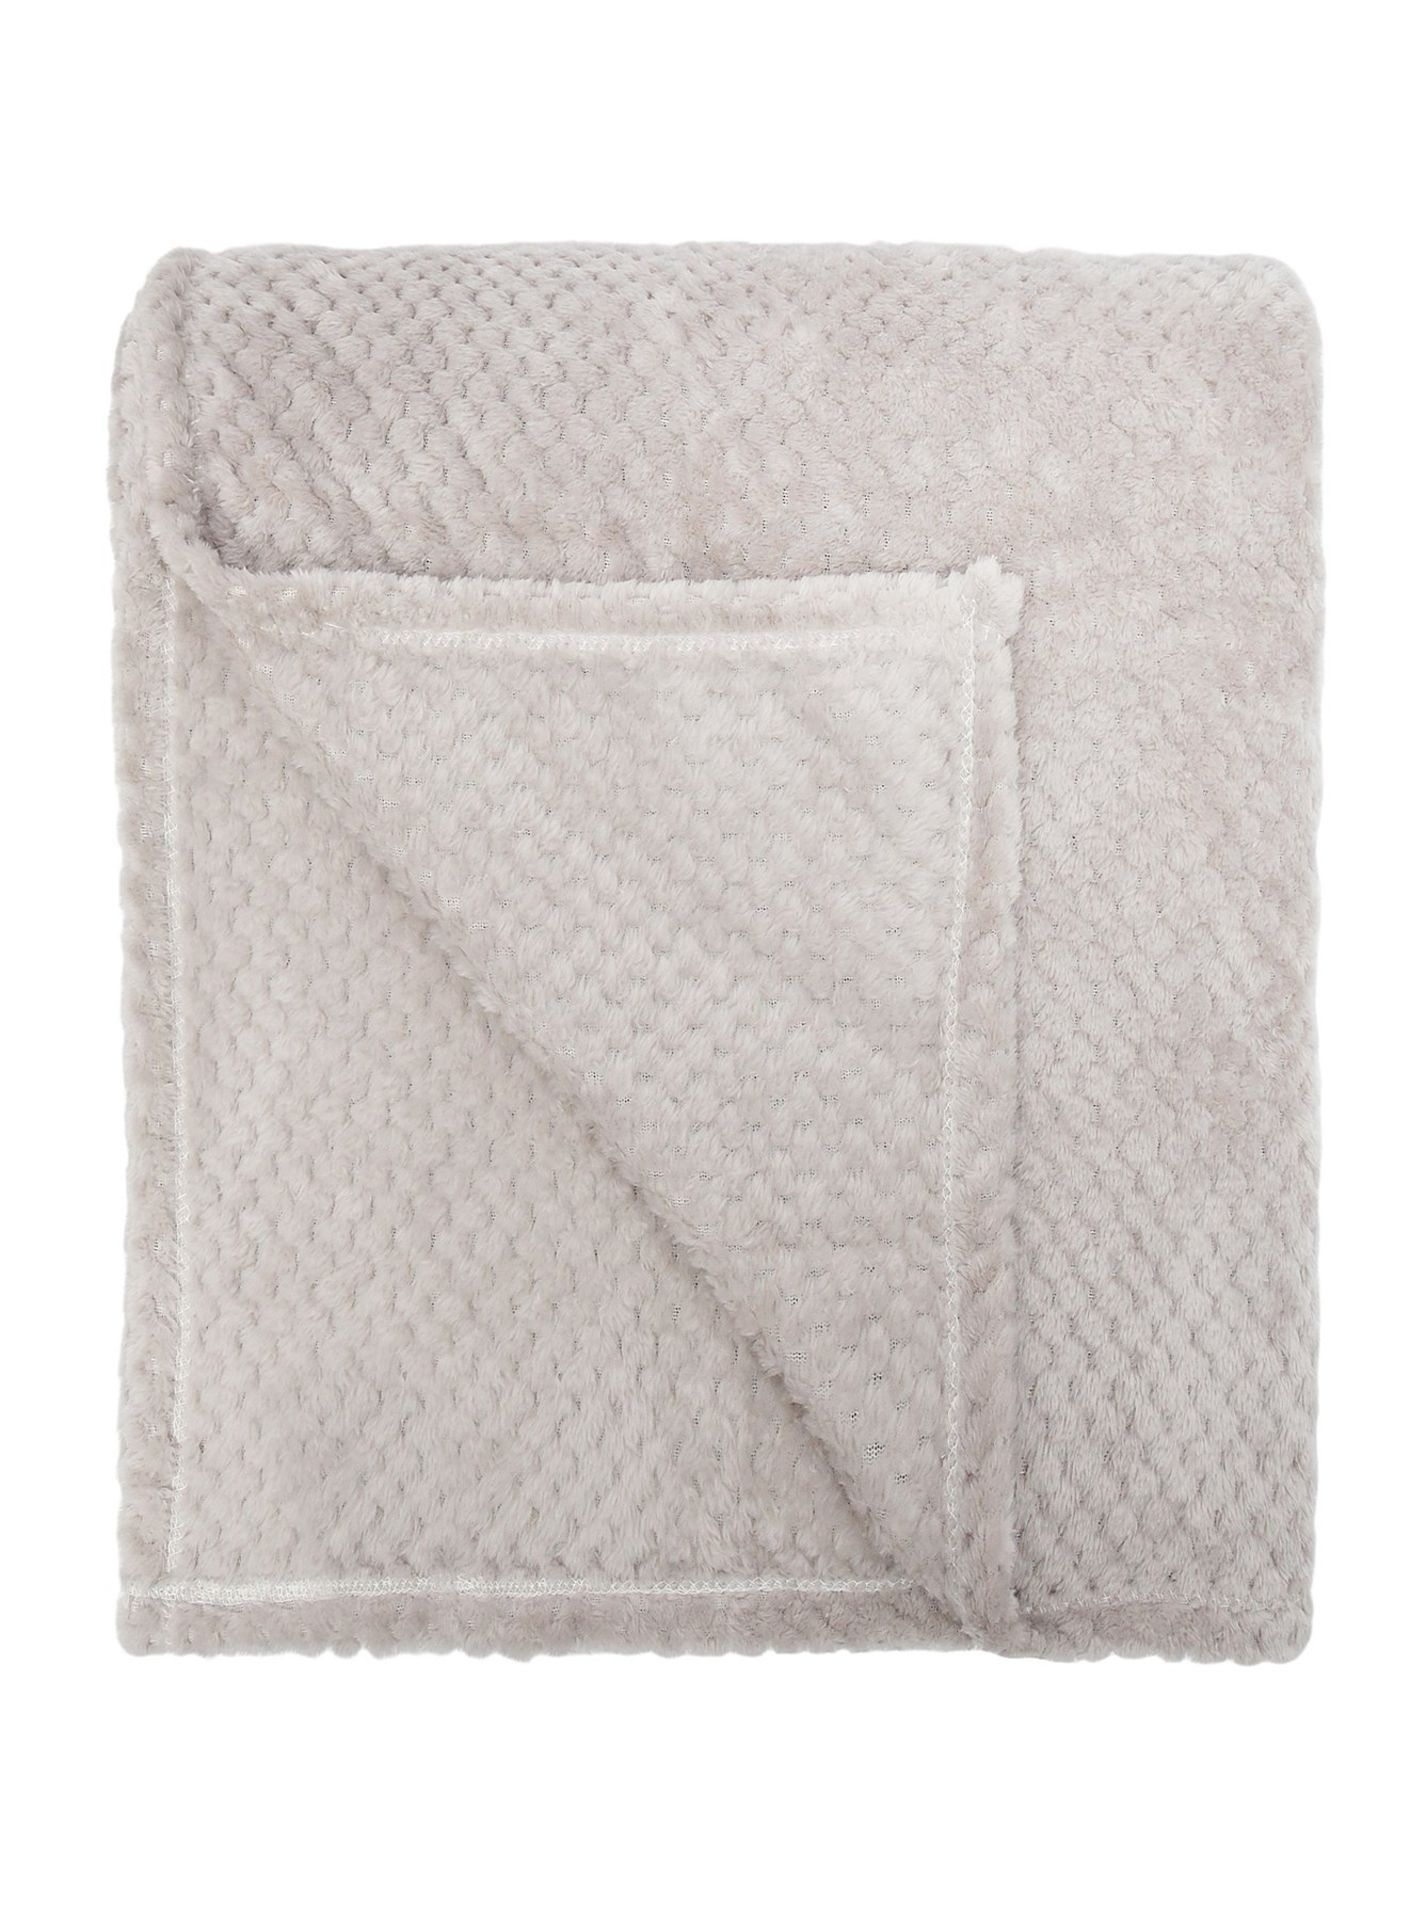 16x NEW & PACKAGED SLEEPDOWN Cosy Collection Soft Touch Waffle Fleece Throw 130 x 160cm - NATURAL. - Image 7 of 7